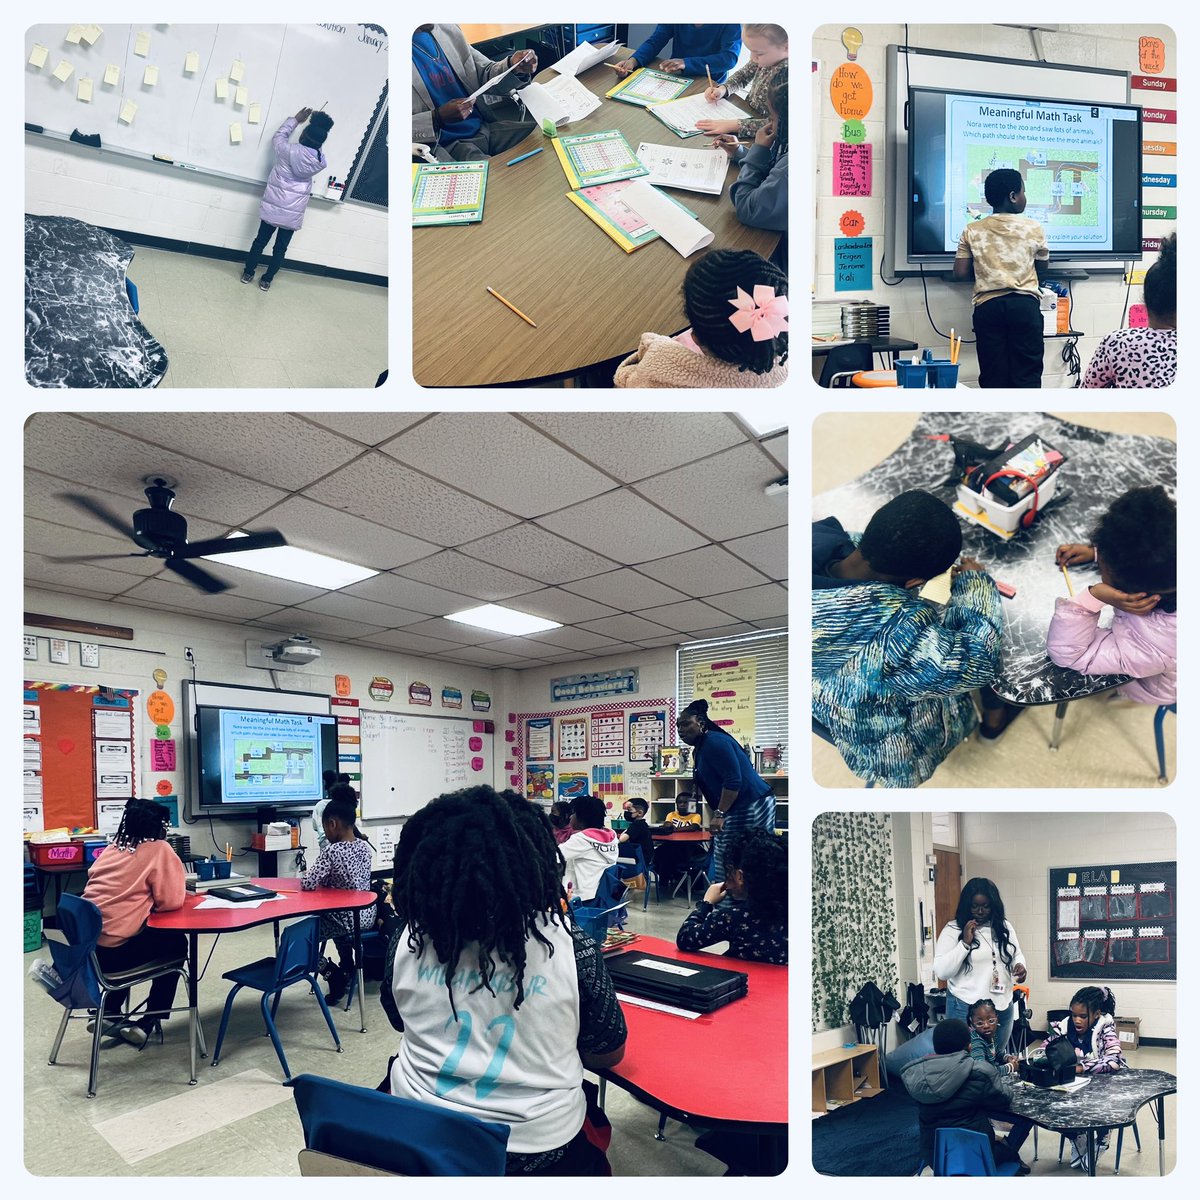 Small groups, high yield strategies, and lots of student discourse today! Such an amazing day of learning at @Manchester_Elem!! @mrsgray620 @taimonge @juliapabstccs